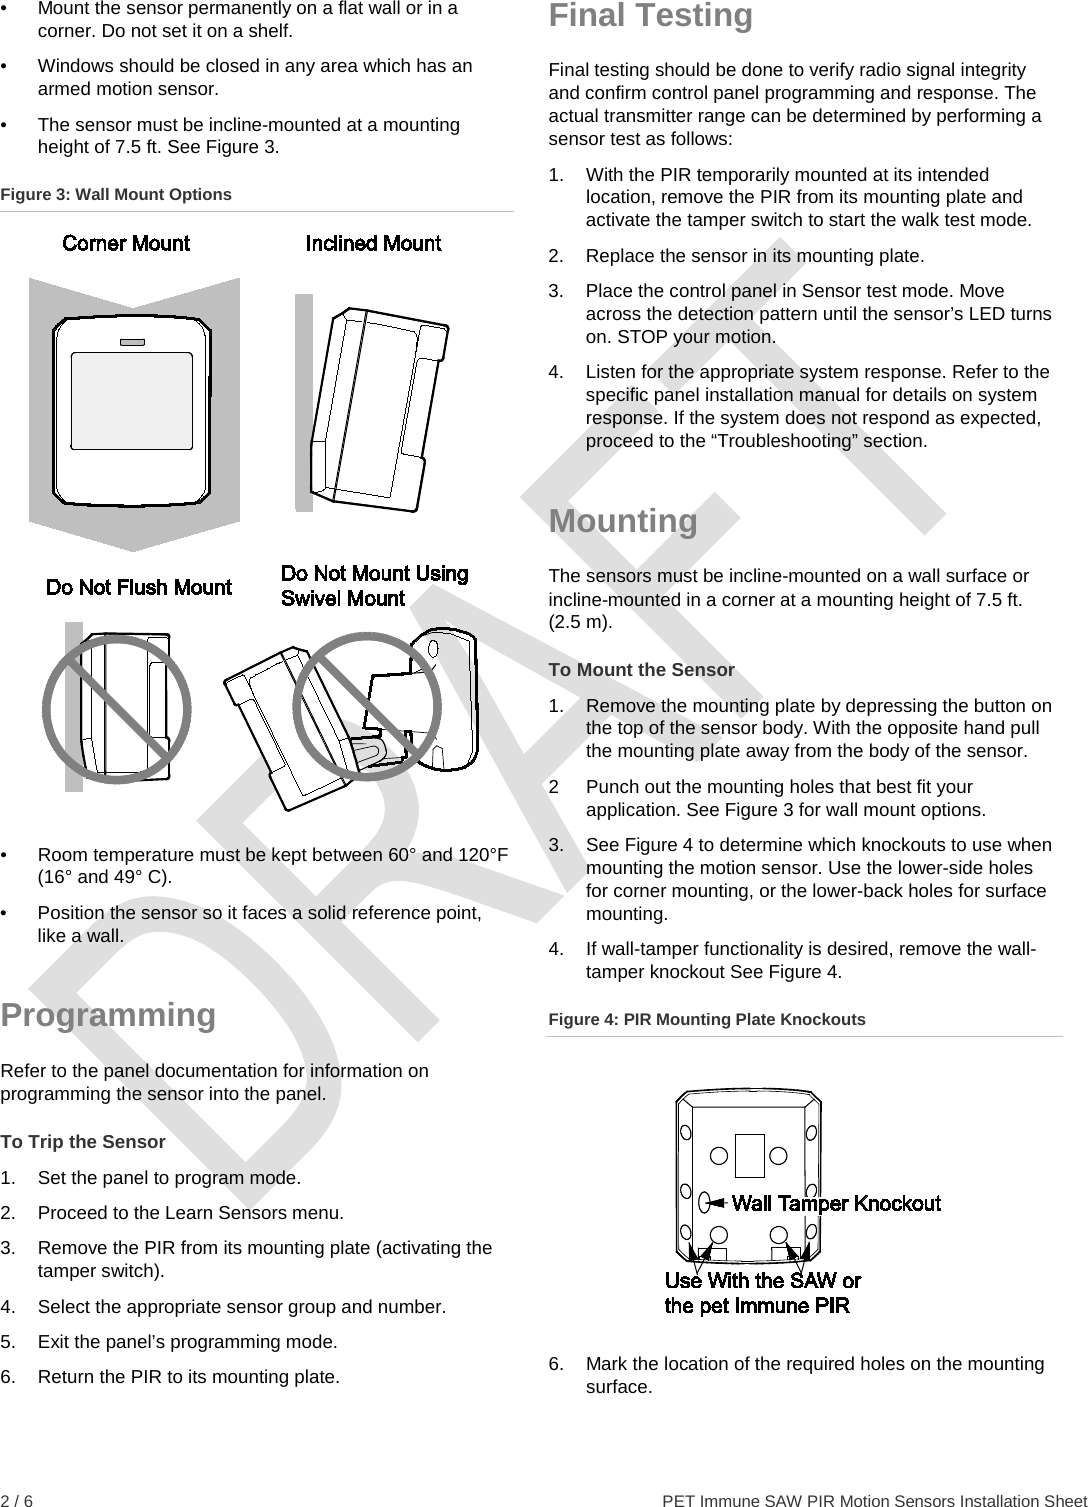  2 / 6    PET Immune SAW PIR Motion Sensors Installation Sheet •  Mount the sensor permanently on a flat wall or in a corner. Do not set it on a shelf. •  Windows should be closed in any area which has an armed motion sensor. •  The sensor must be incline-mounted at a mounting height of 7.5 ft. See Figure 3. Figure 3: Wall Mount Options  •  Room temperature must be kept between 60° and 120°F (16° and 49° C). •  Position the sensor so it faces a solid reference point, like a wall. Programming Refer to the panel documentation for information on programming the sensor into the panel. To Trip the Sensor 1.  Set the panel to program mode. 2. Proceed to the Learn Sensors menu. 3. Remove the PIR from its mounting plate (activating the tamper switch). 4. Select the appropriate sensor group and number. 5.  Exit the panel’s programming mode. 6.  Return the PIR to its mounting plate. Final Testing Final testing should be done to verify radio signal integrity and confirm control panel programming and response. The actual transmitter range can be determined by performing a sensor test as follows: 1.  With the PIR temporarily mounted at its intended location, remove the PIR from its mounting plate and activate the tamper switch to start the walk test mode. 2.  Replace the sensor in its mounting plate. 3.  Place the control panel in Sensor test mode. Move across the detection pattern until the sensor’s LED turns on. STOP your motion. 4.  Listen for the appropriate system response. Refer to the specific panel installation manual for details on system response. If the system does not respond as expected, proceed to the “Troubleshooting” section. Mounting The sensors must be incline-mounted on a wall surface or incline-mounted in a corner at a mounting height of 7.5 ft. (2.5 m). To Mount the Sensor 1.  Remove the mounting plate by depressing the button on the top of the sensor body. With the opposite hand pull the mounting plate away from the body of the sensor. 2  Punch out the mounting holes that best fit your application. See Figure 3 for wall mount options. 3. See Figure 4 to determine which knockouts to use when mounting the motion sensor. Use the lower-side holes for corner mounting, or the lower-back holes for surface mounting. 4.  If wall-tamper functionality is desired, remove the wall-tamper knockout See Figure 4. Figure 4: PIR Mounting Plate Knockouts  6.  Mark the location of the required holes on the mounting surface. 